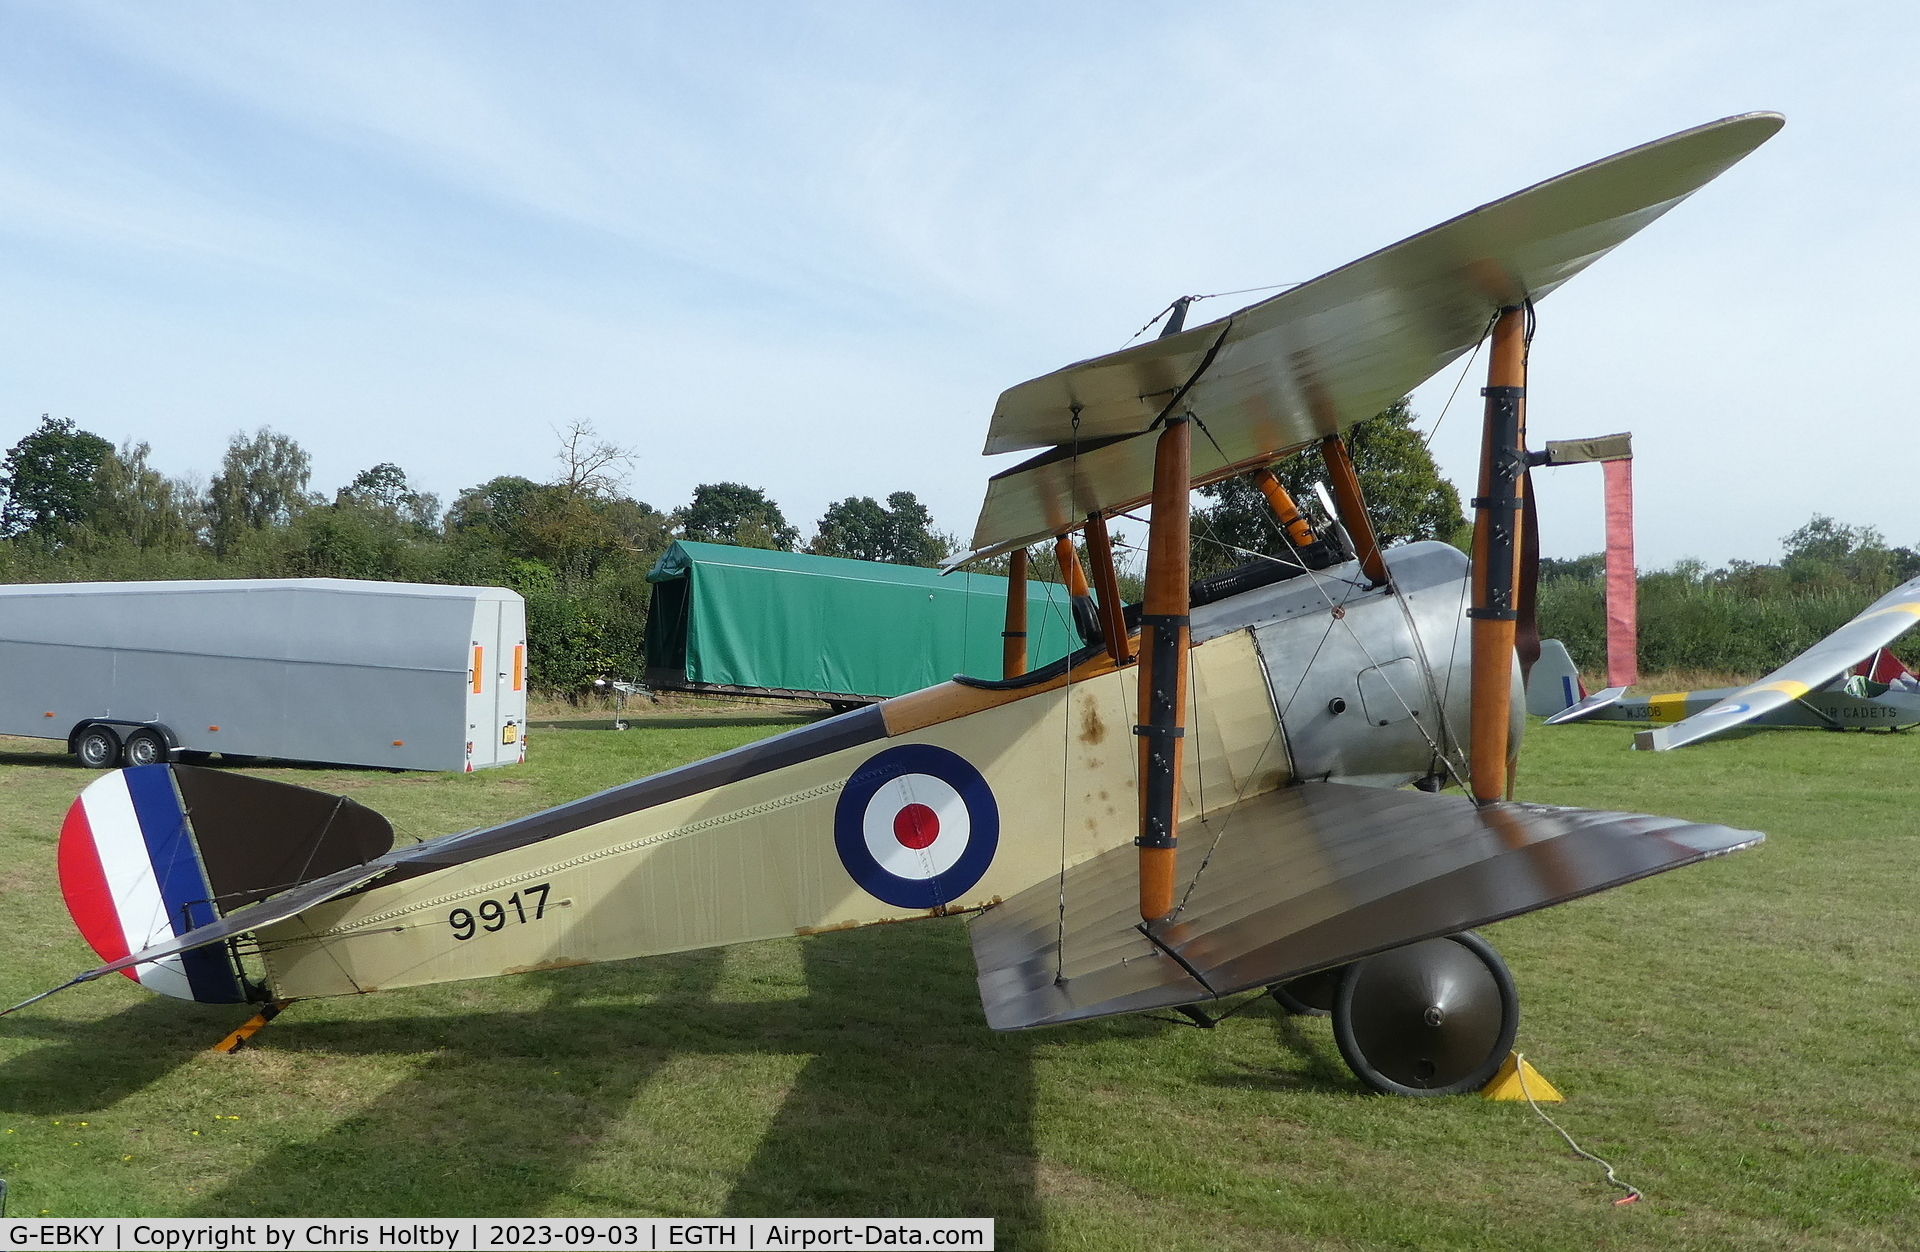 G-EBKY, 1920 Sopwith Pup C/N W/O 3004/14, 1920 Sopwith Pup rolled out for the Vintage Air Display at Old Warden